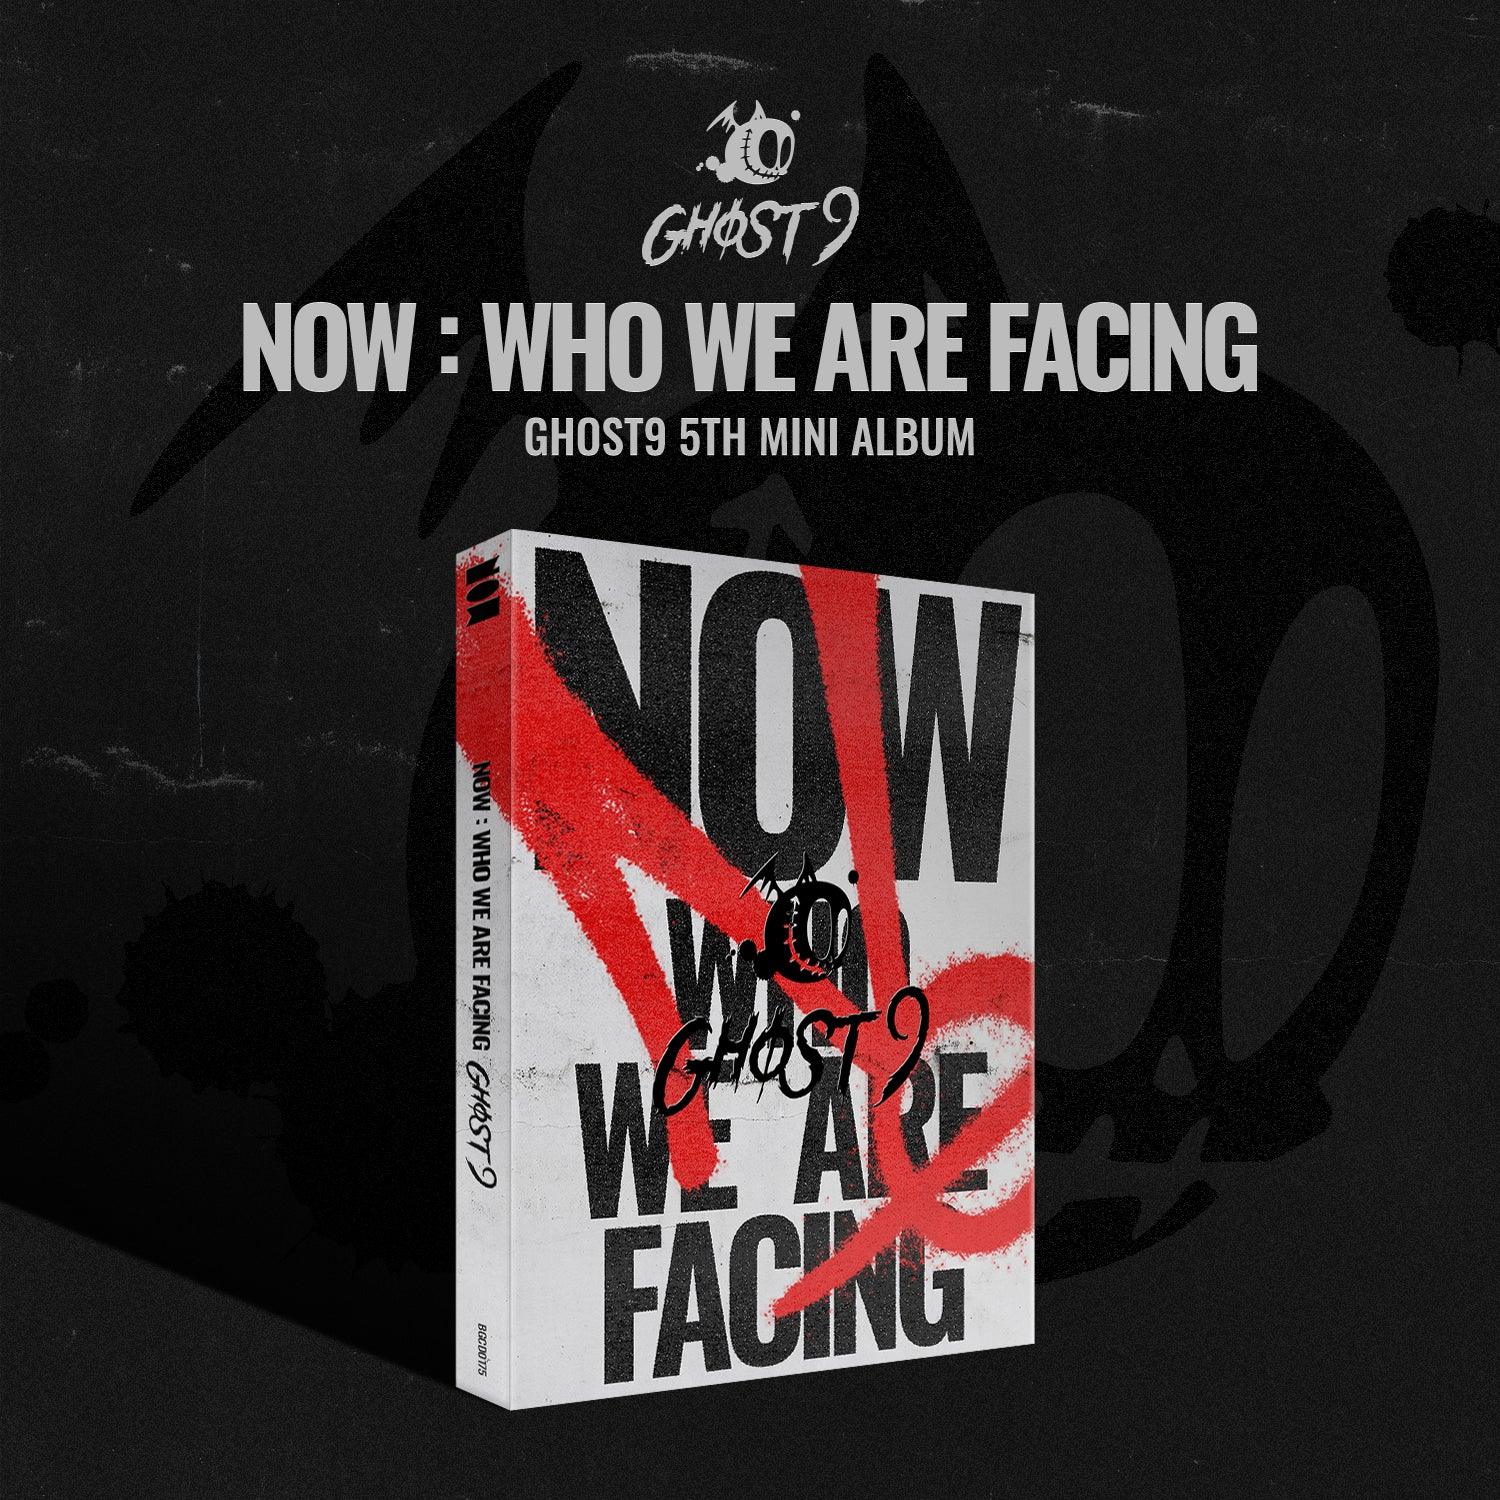 GHOST9 5TH MINI ALBUM 'NOW : WHO WE ARE FACING' COVER